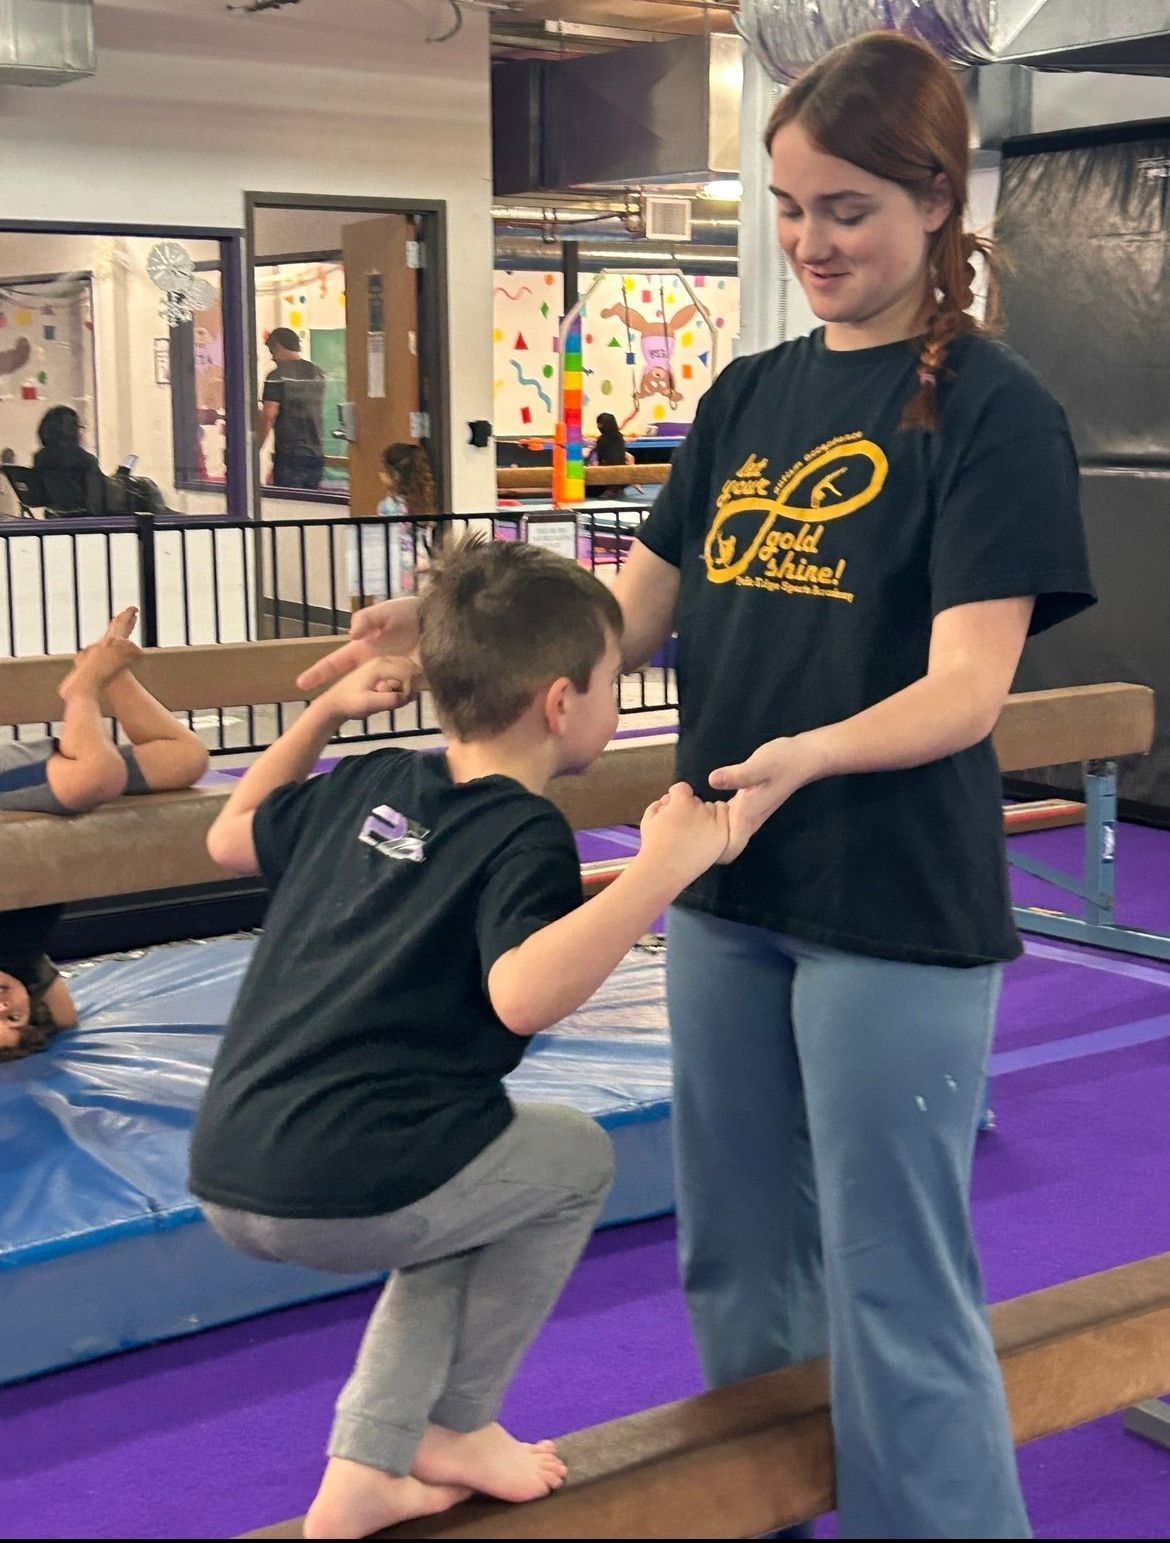 A woman is helping a young boy balance on a balance beam